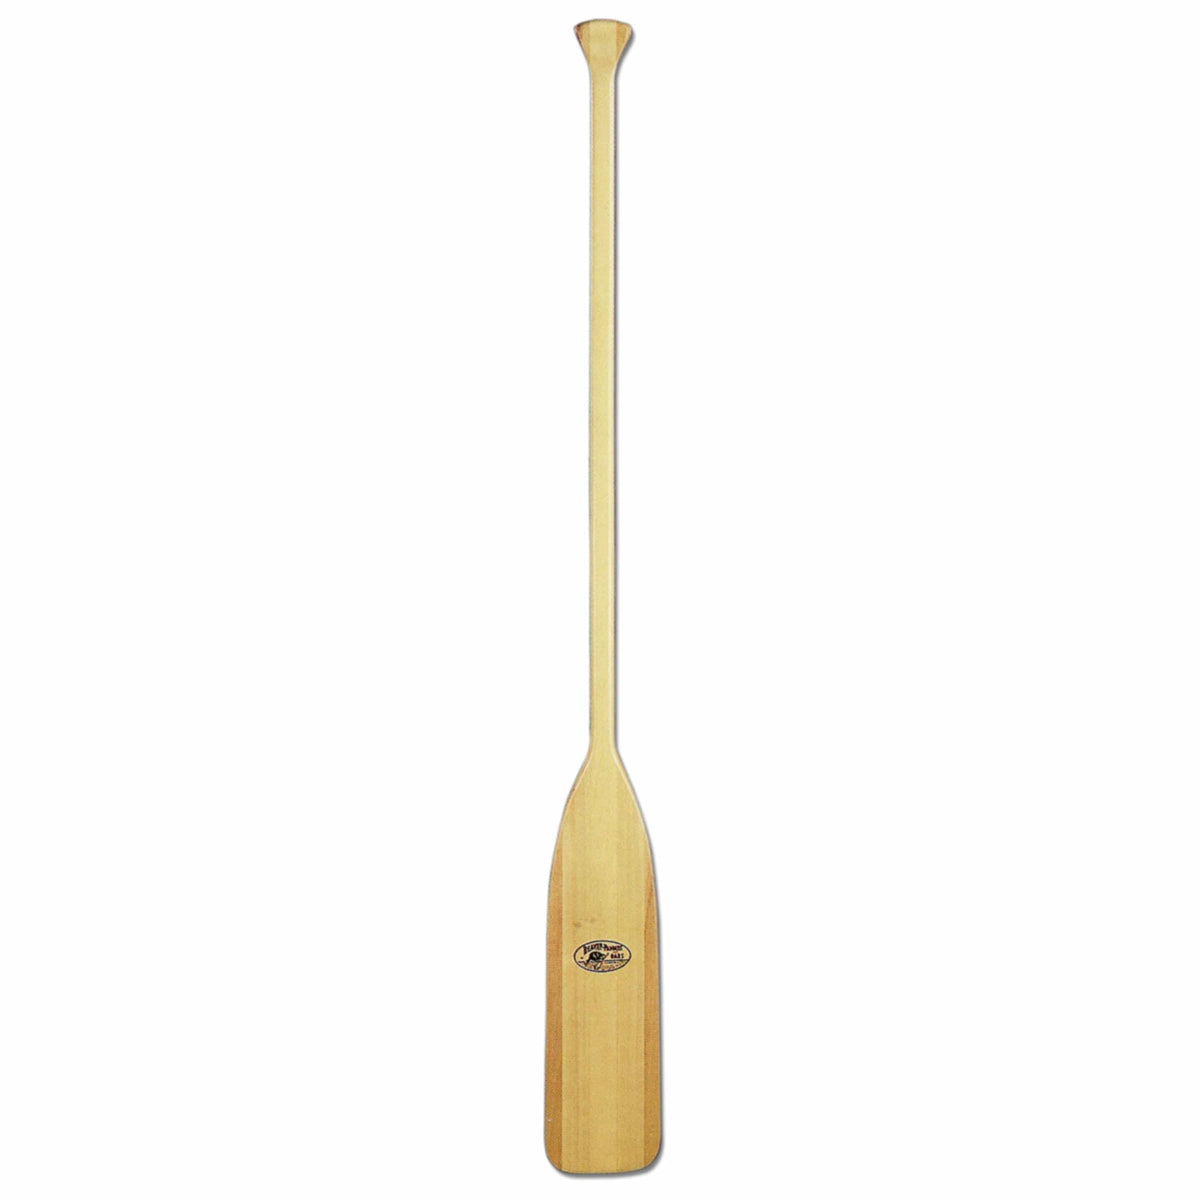 Caviness Woodworking Qualifies for Free Shipping Caviness BP Series Varnished Wooden Paddle 5.5' #BP55